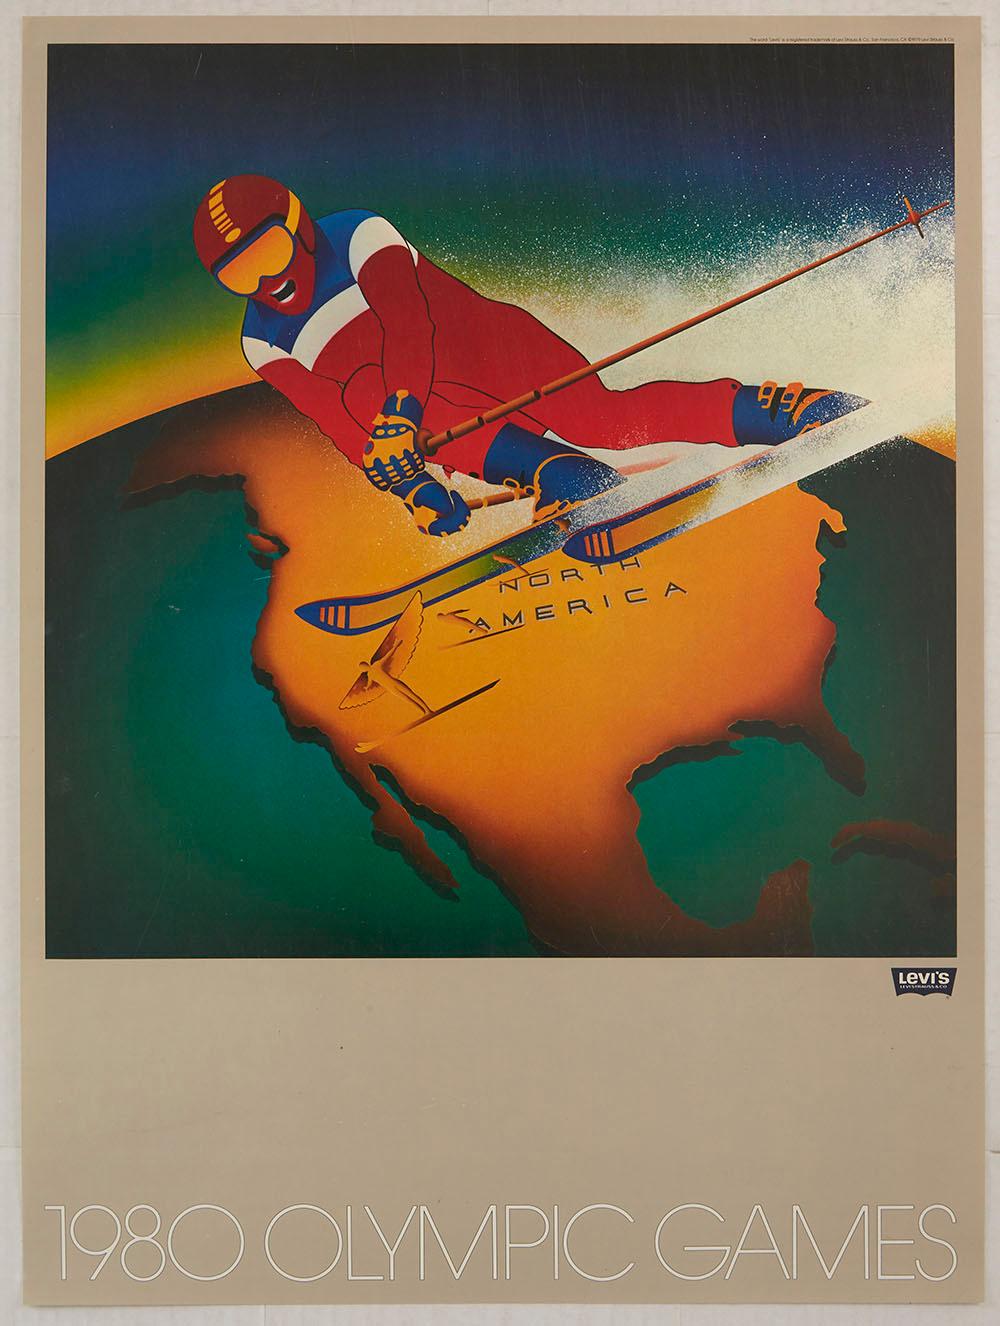 Michael Gibson Print - Original Vintage Sport Poster Levi's Moscow 1980 Olympic Games N. America Skiing